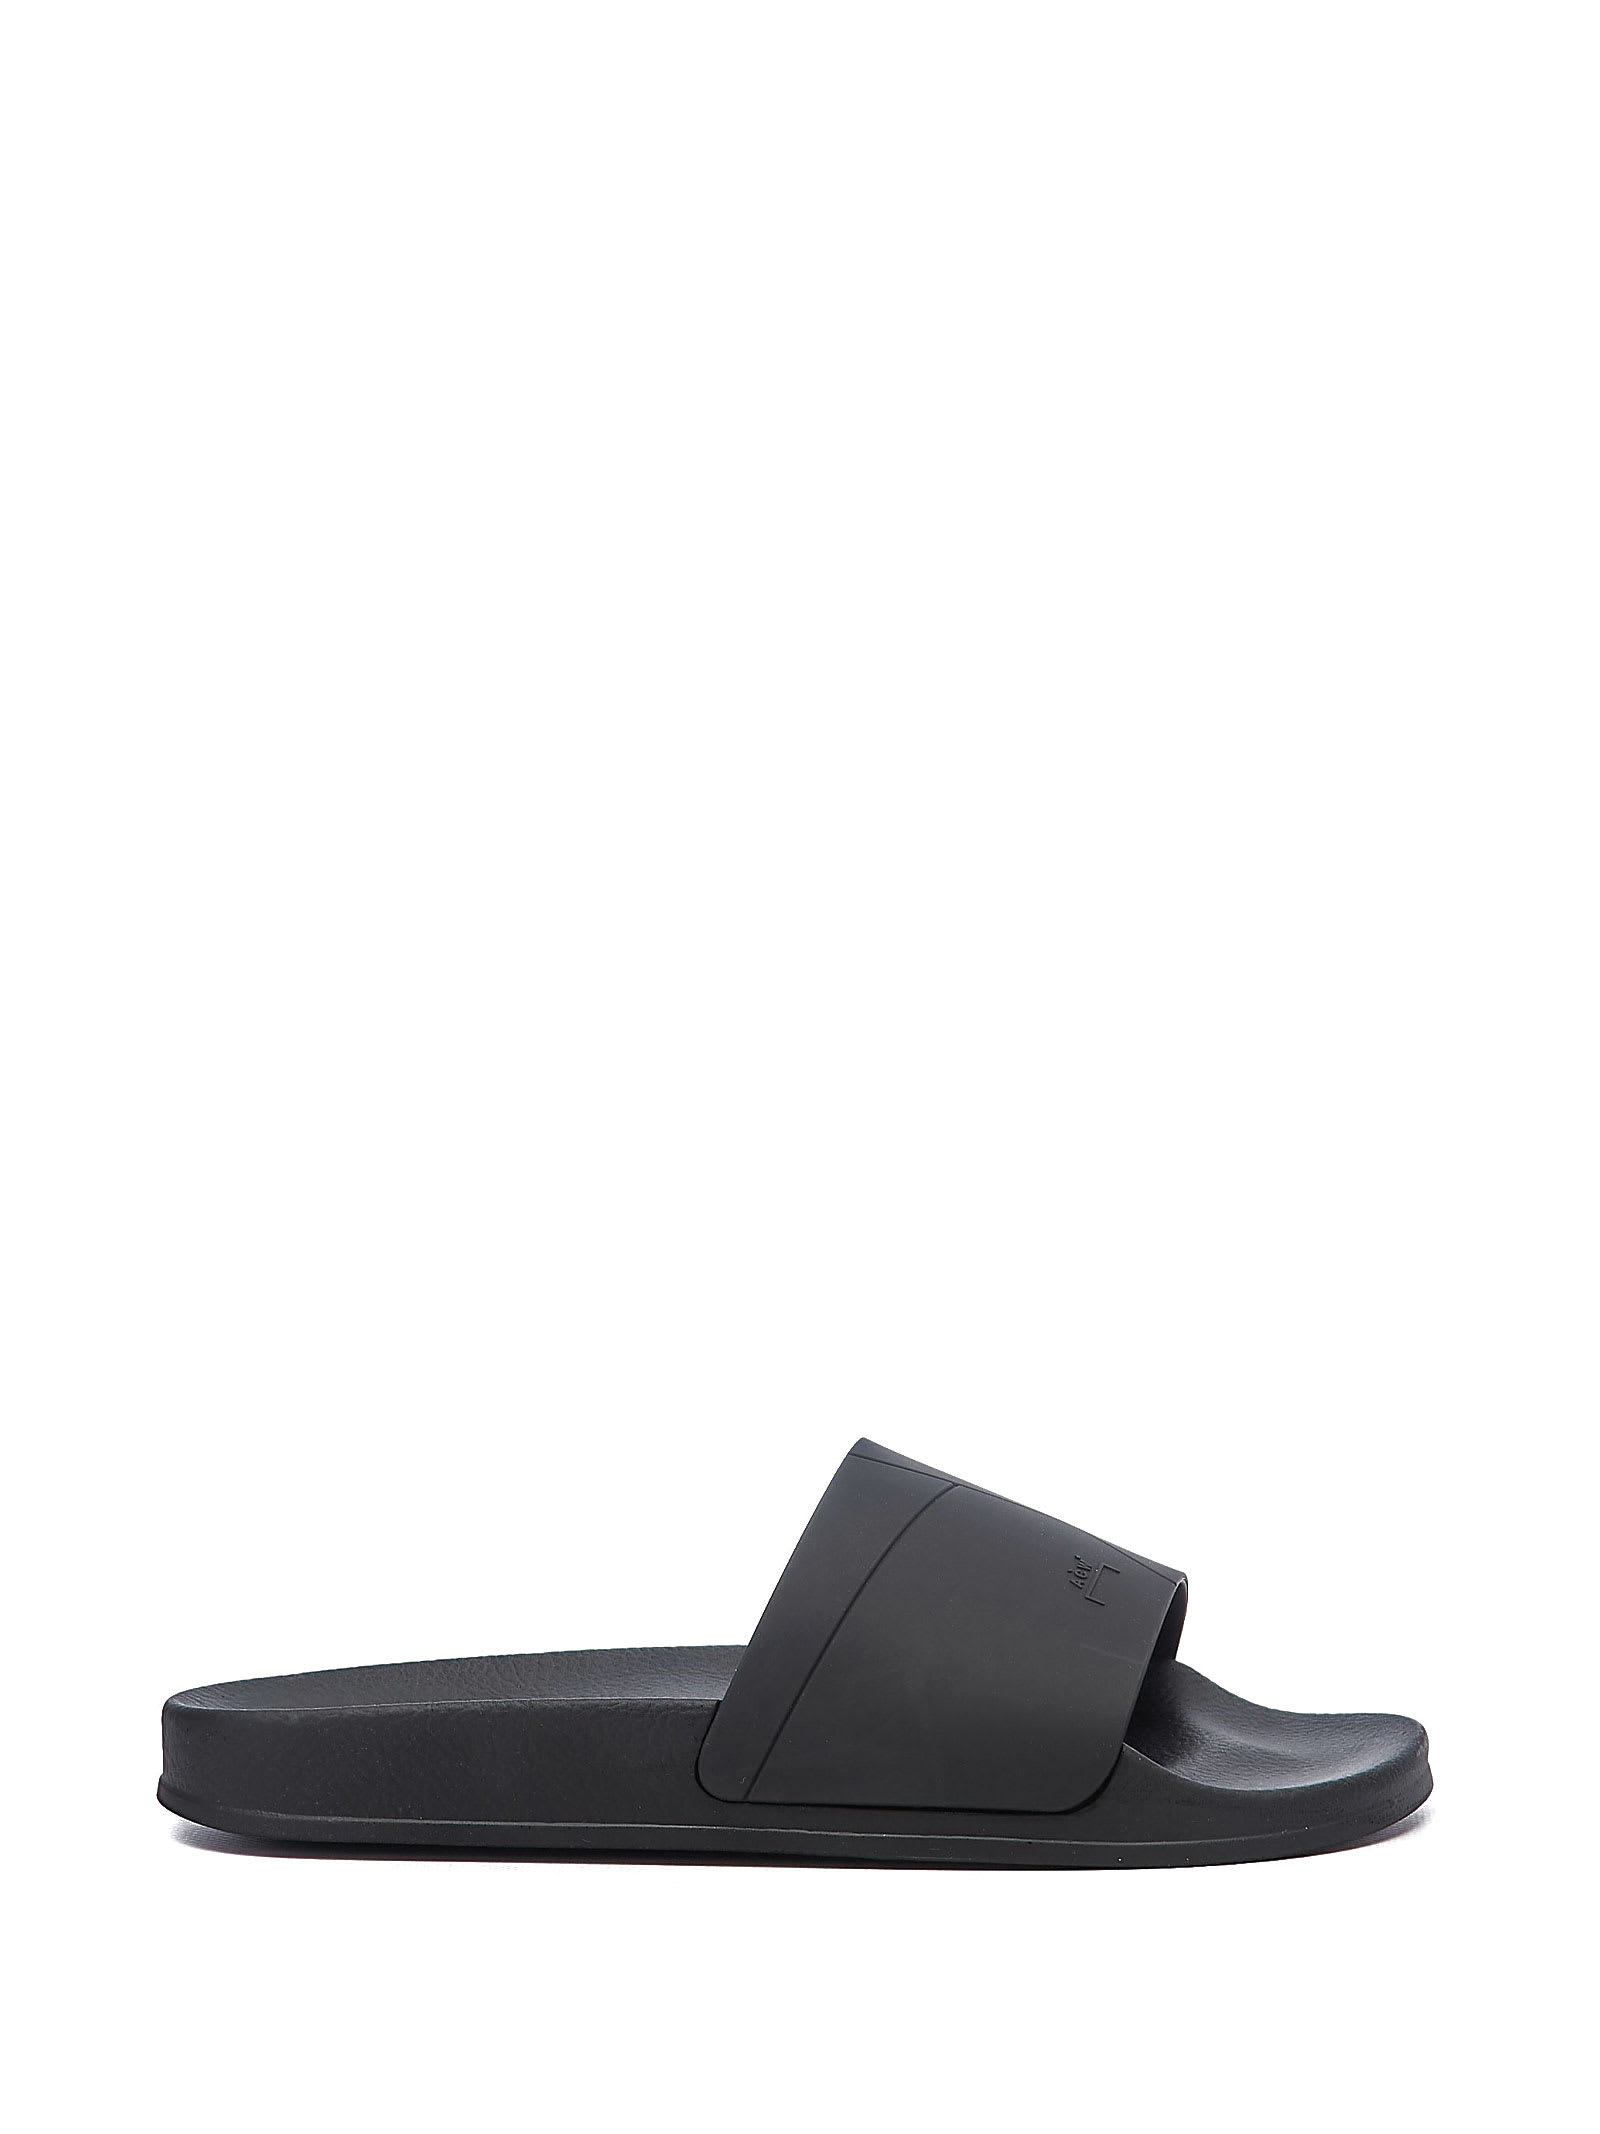 A-COLD-WALL* BLACK RUBBER SANDALS,ACWUF002 BLACK